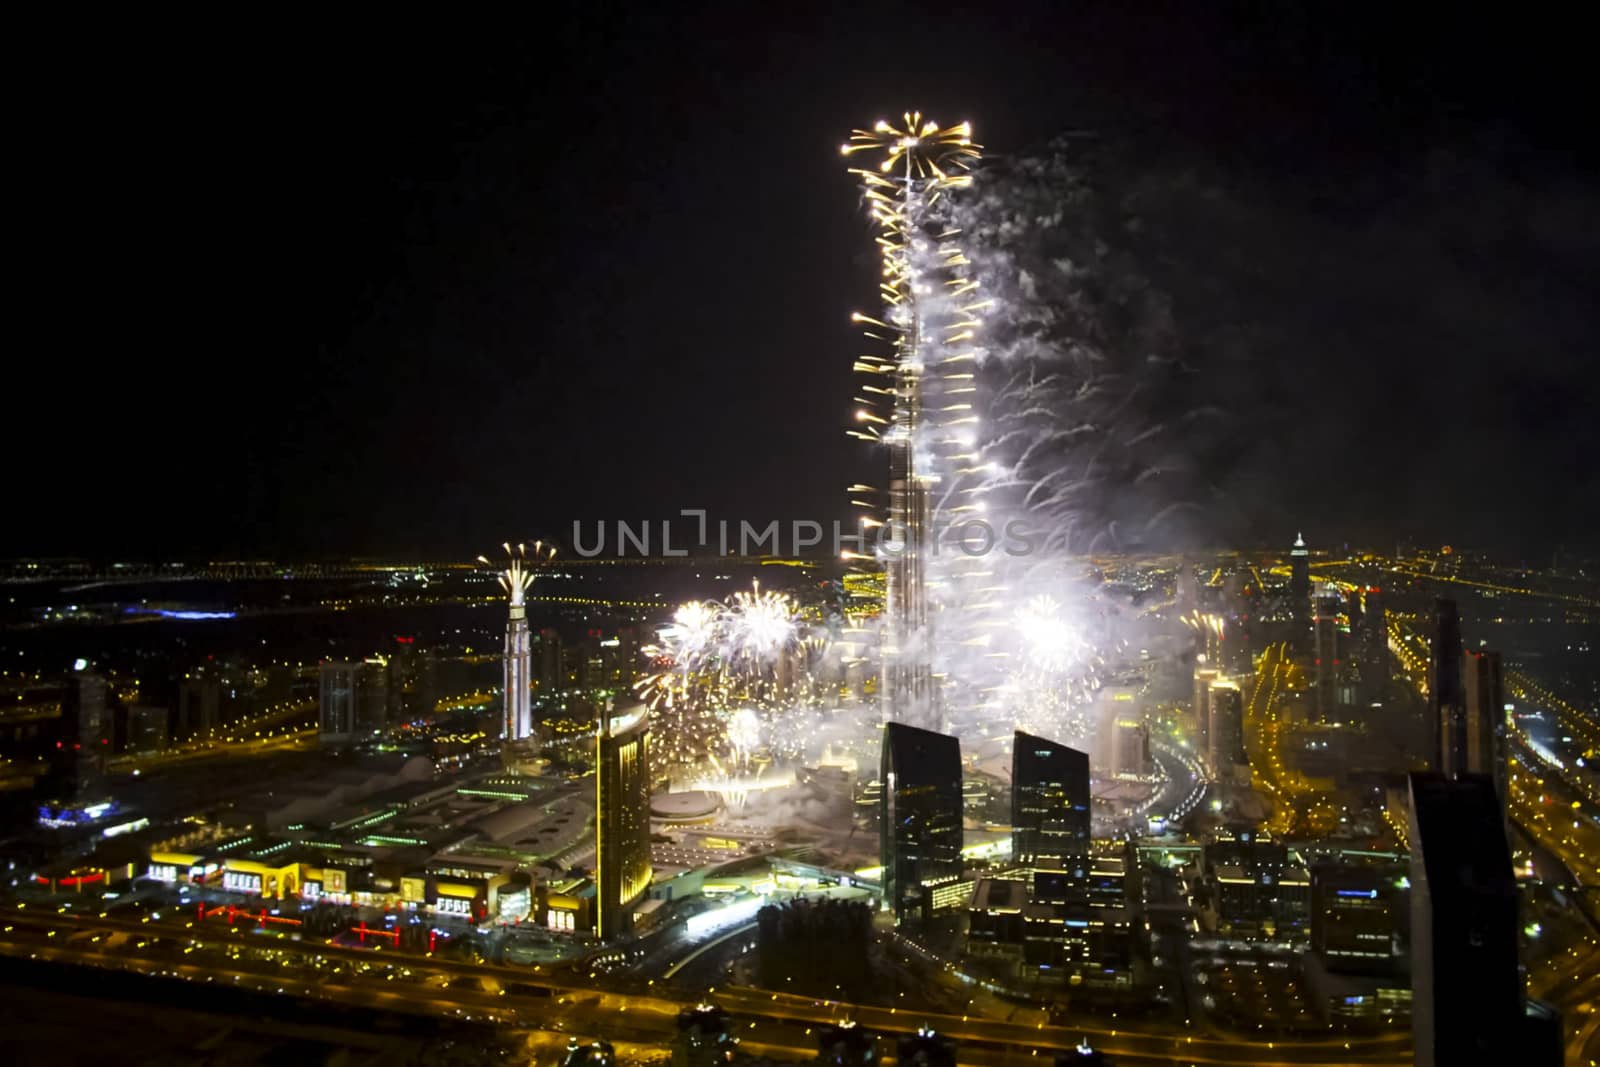 Festive firework in Dubai. Beautiful colorful holiday fireworks in the evening sky with majestic clouds, long exposure